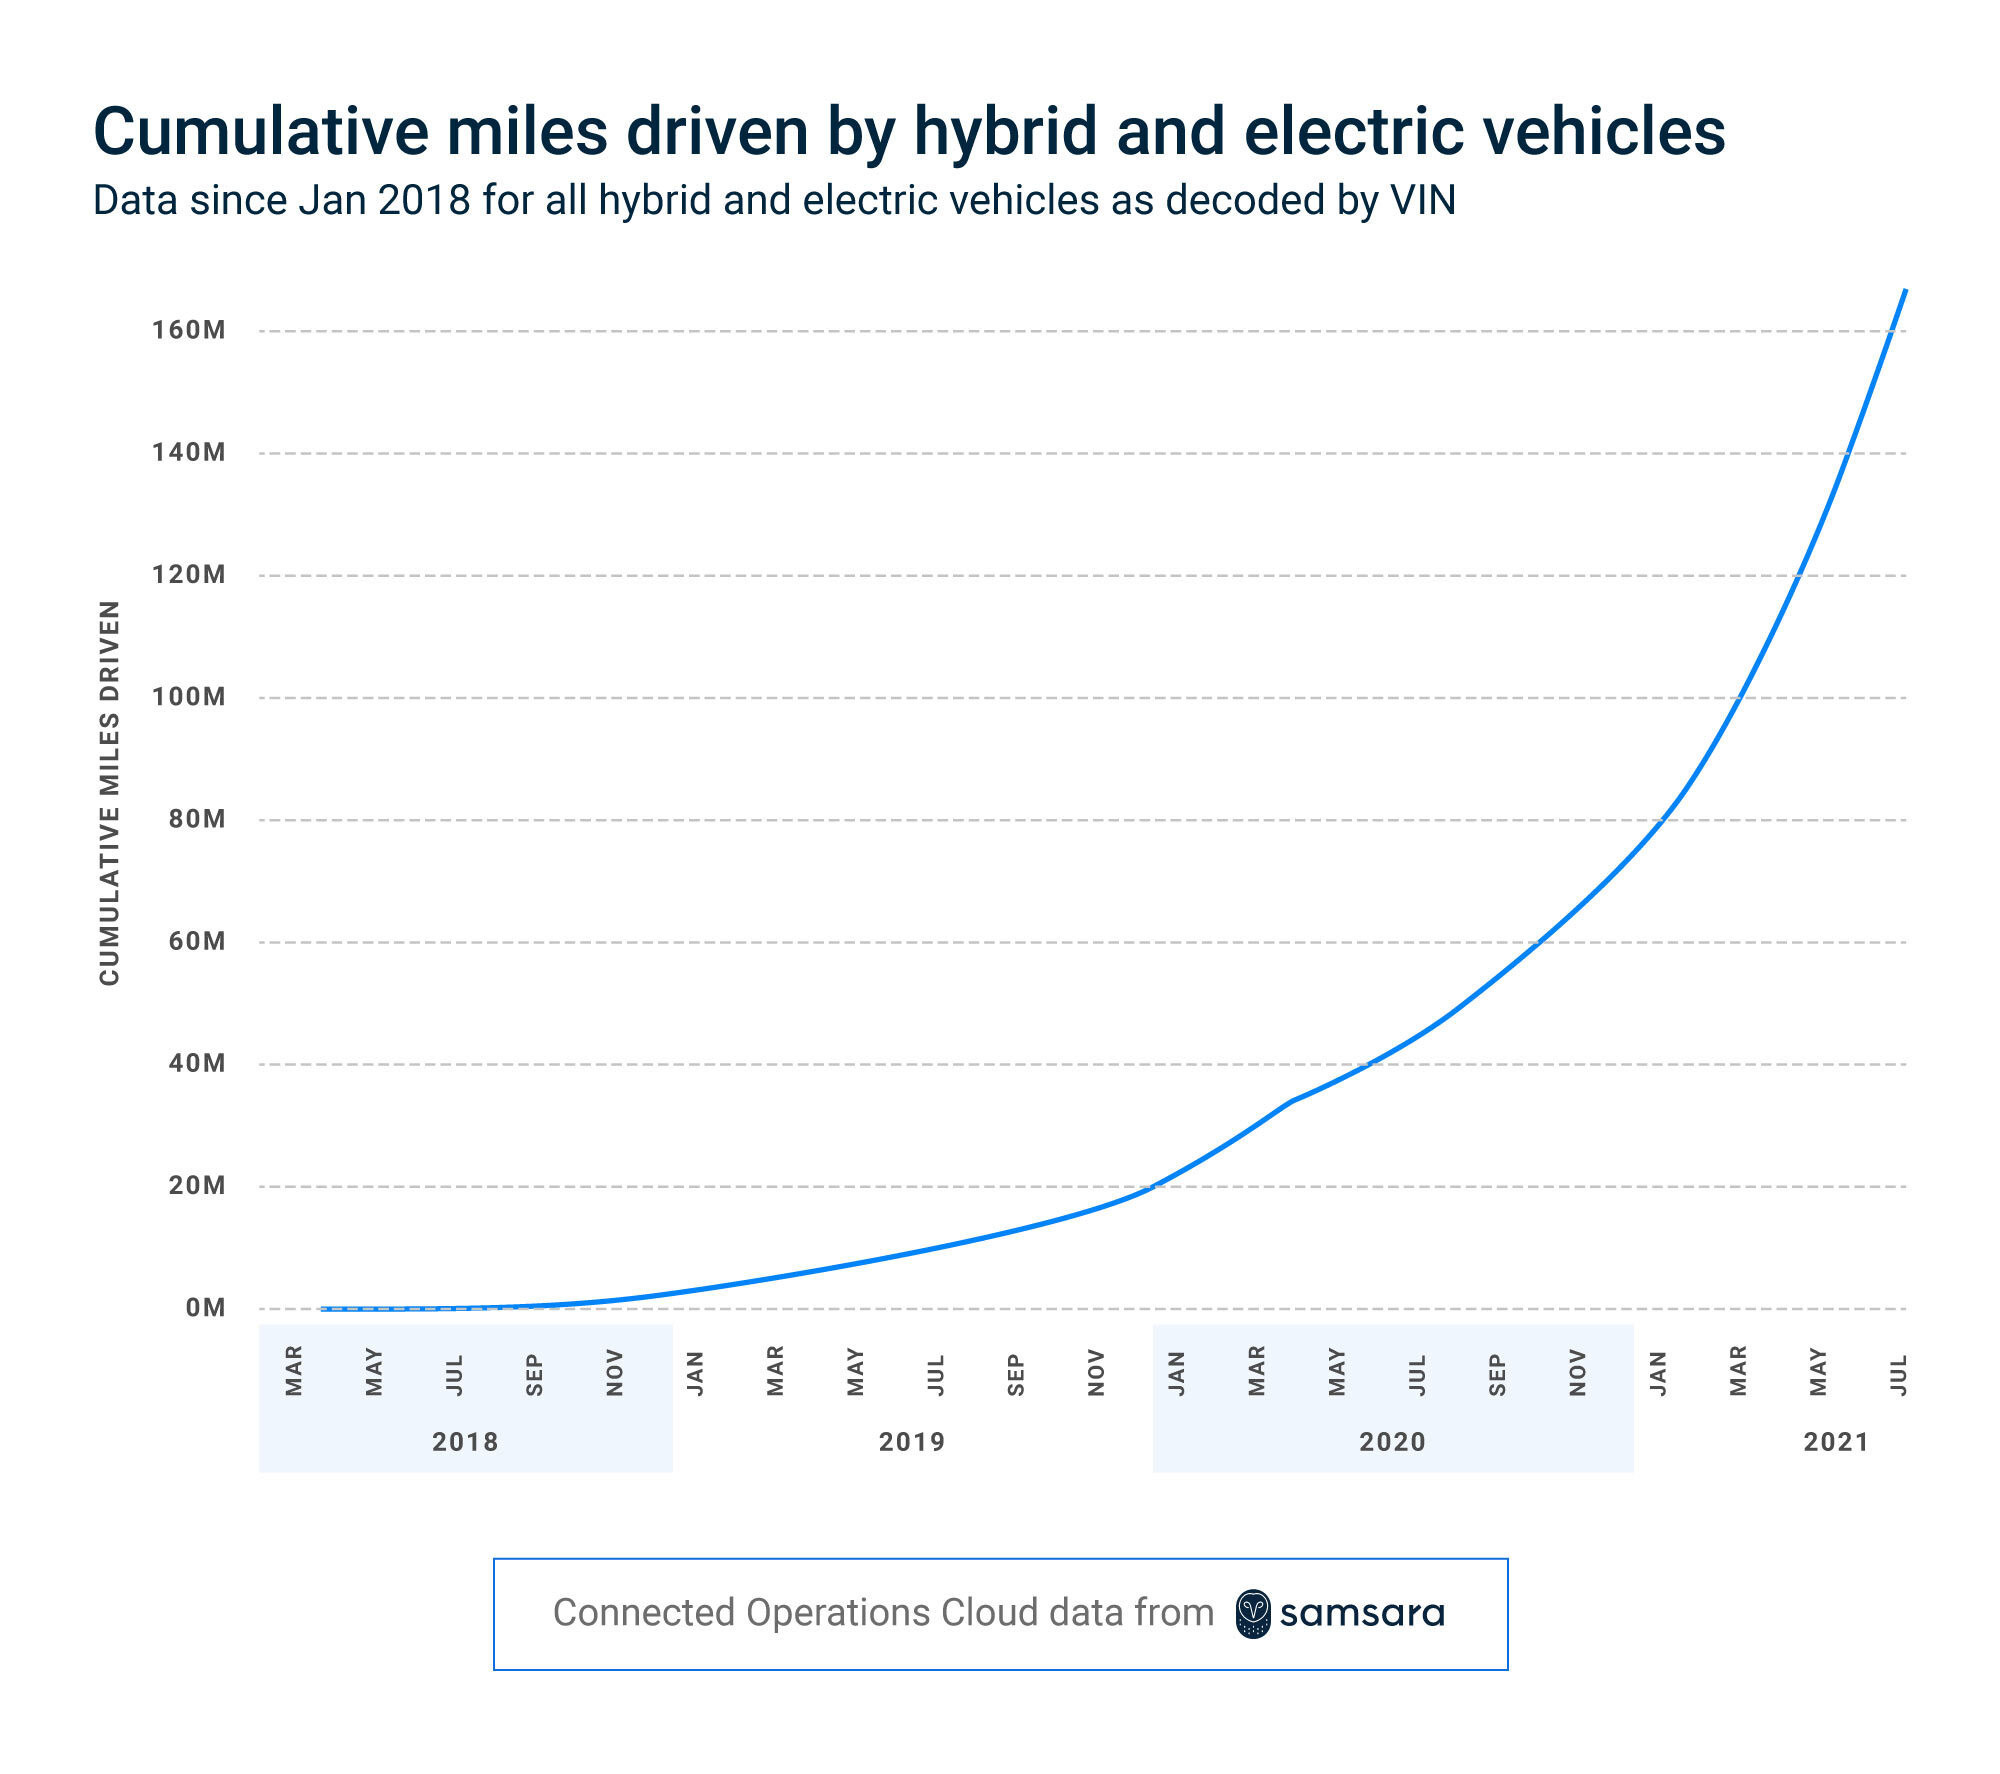 Since 2018, Samsara customers have driven more than 160 million cumulative hybrid and electric miles.